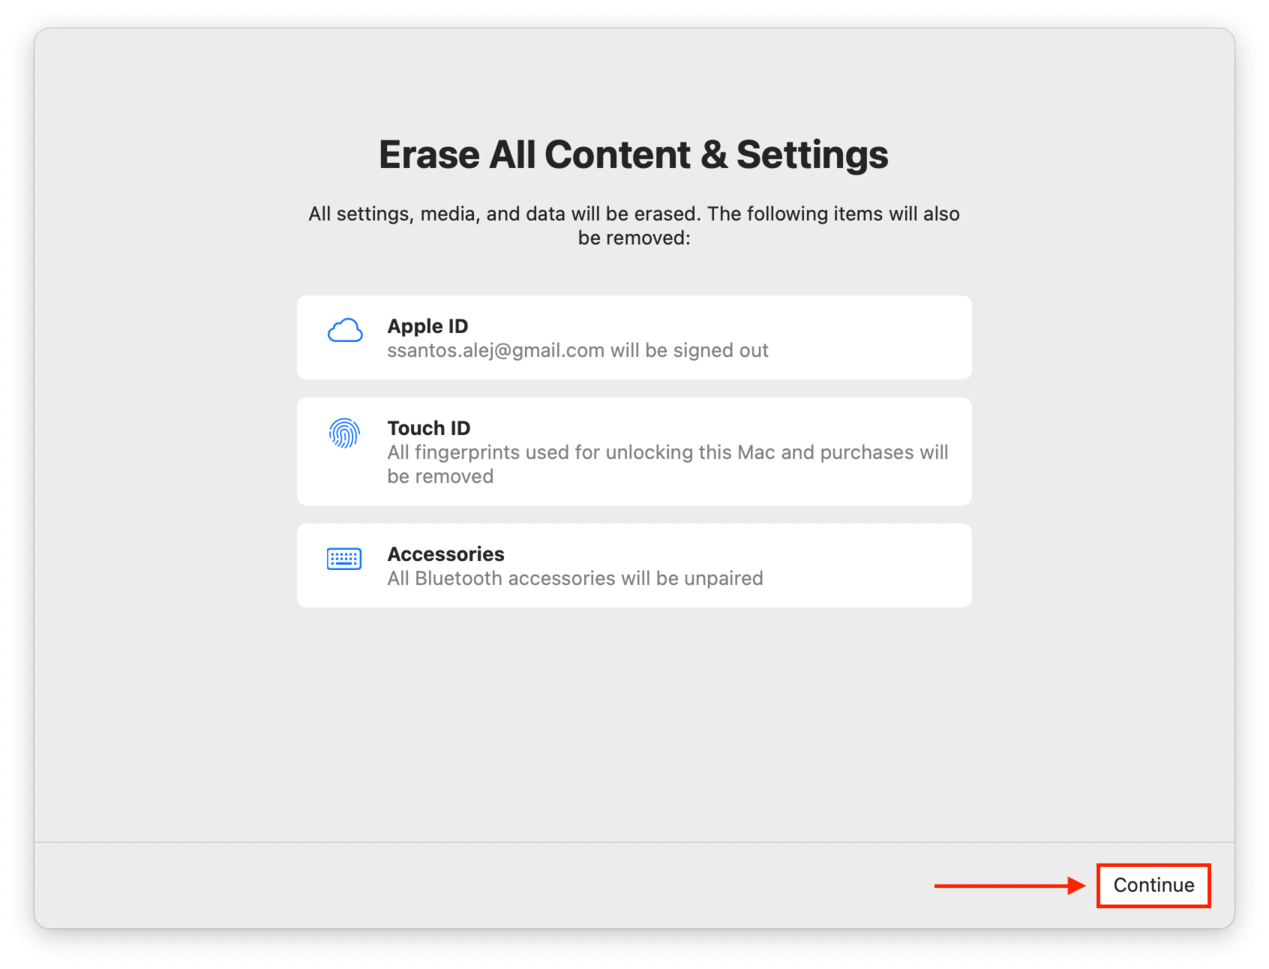 erase all content and settings initialization window with an outline highlighting the continue button